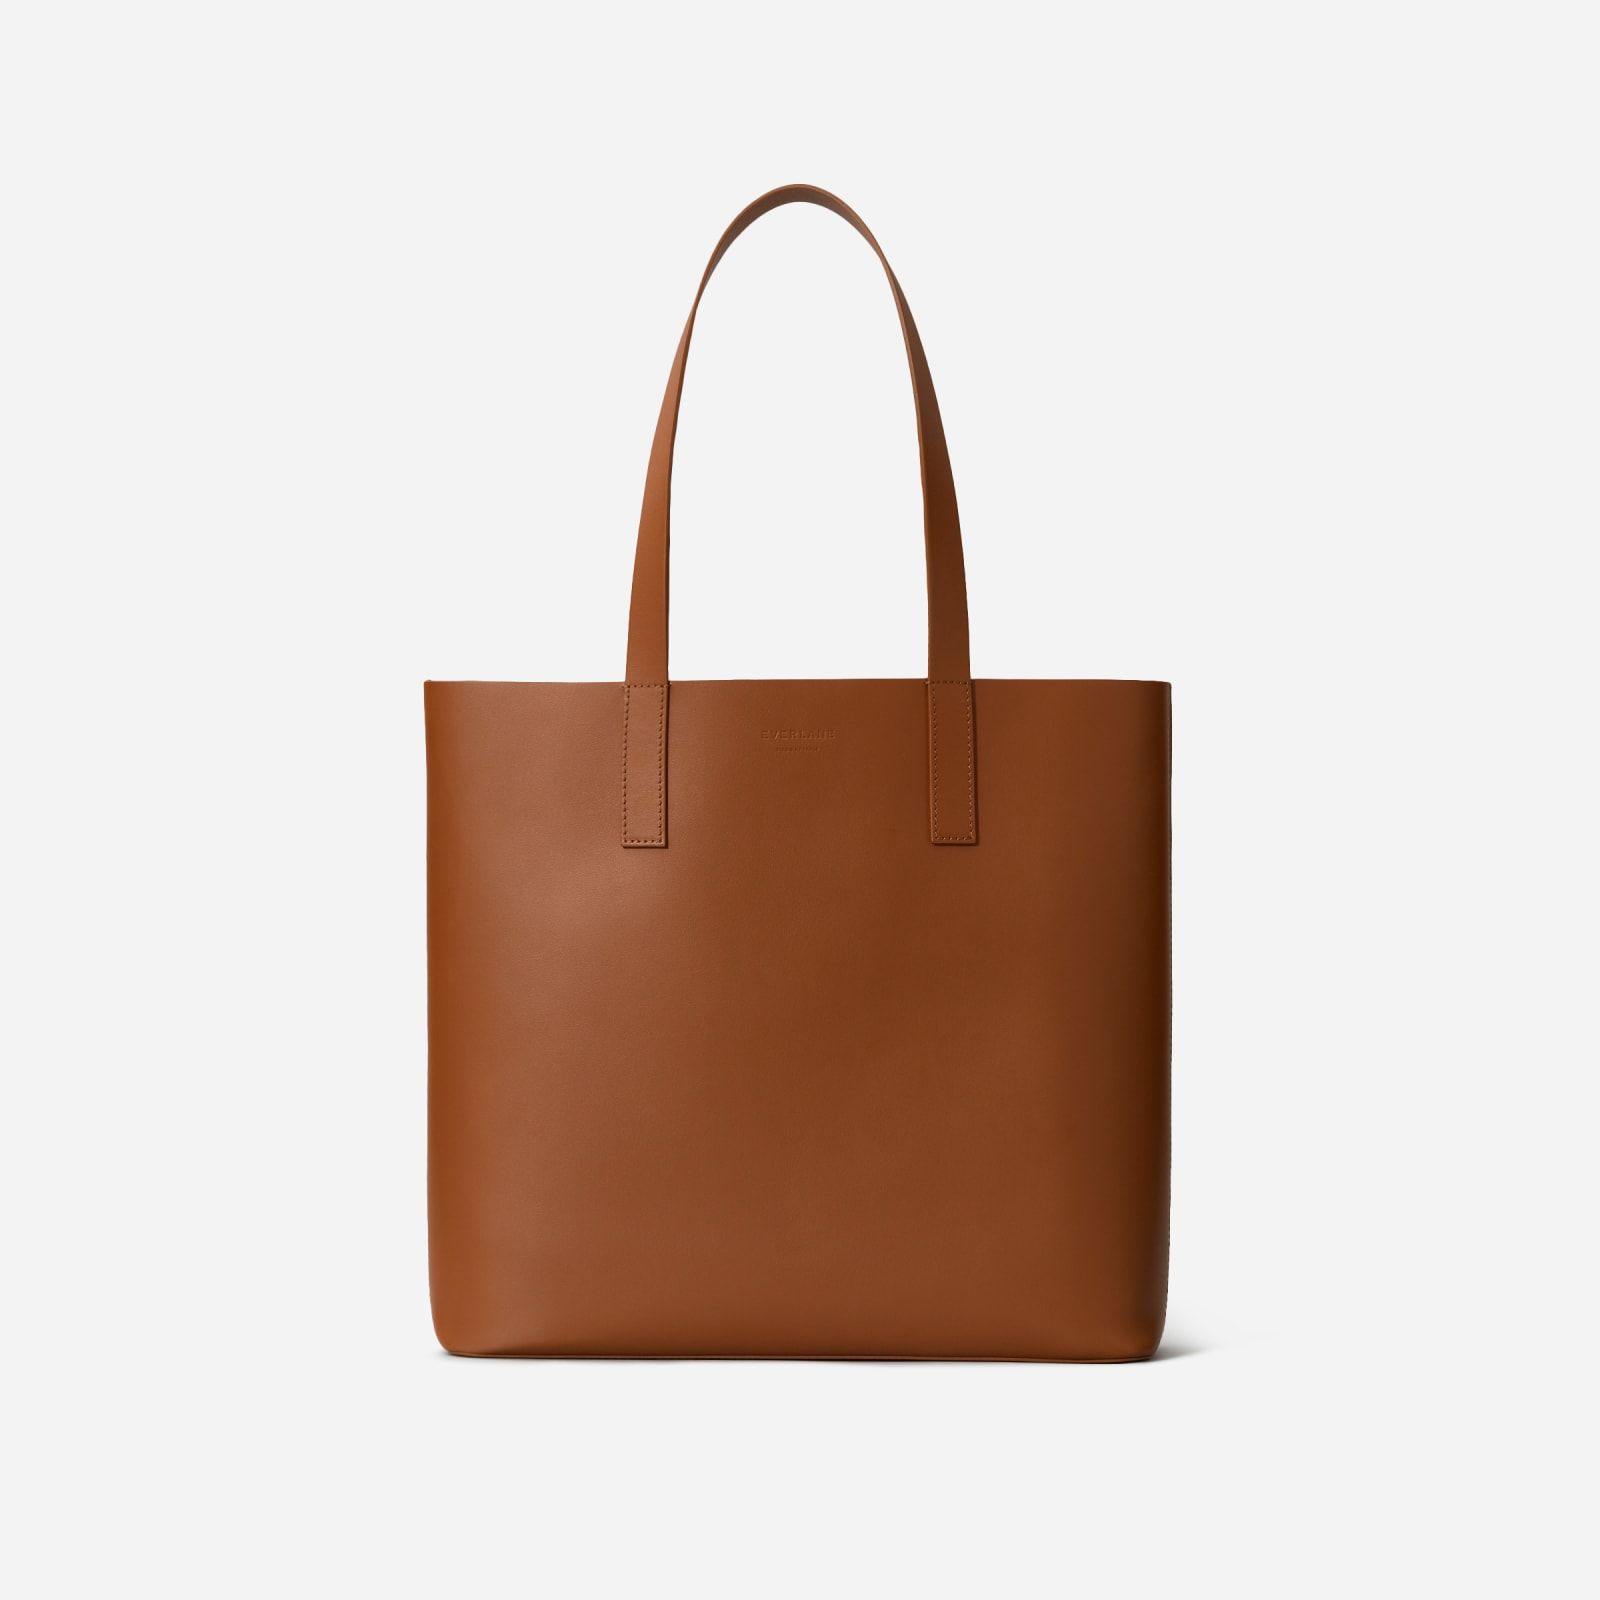 Women's Day Square Tote Bag by Everlane in Cognac | Everlane